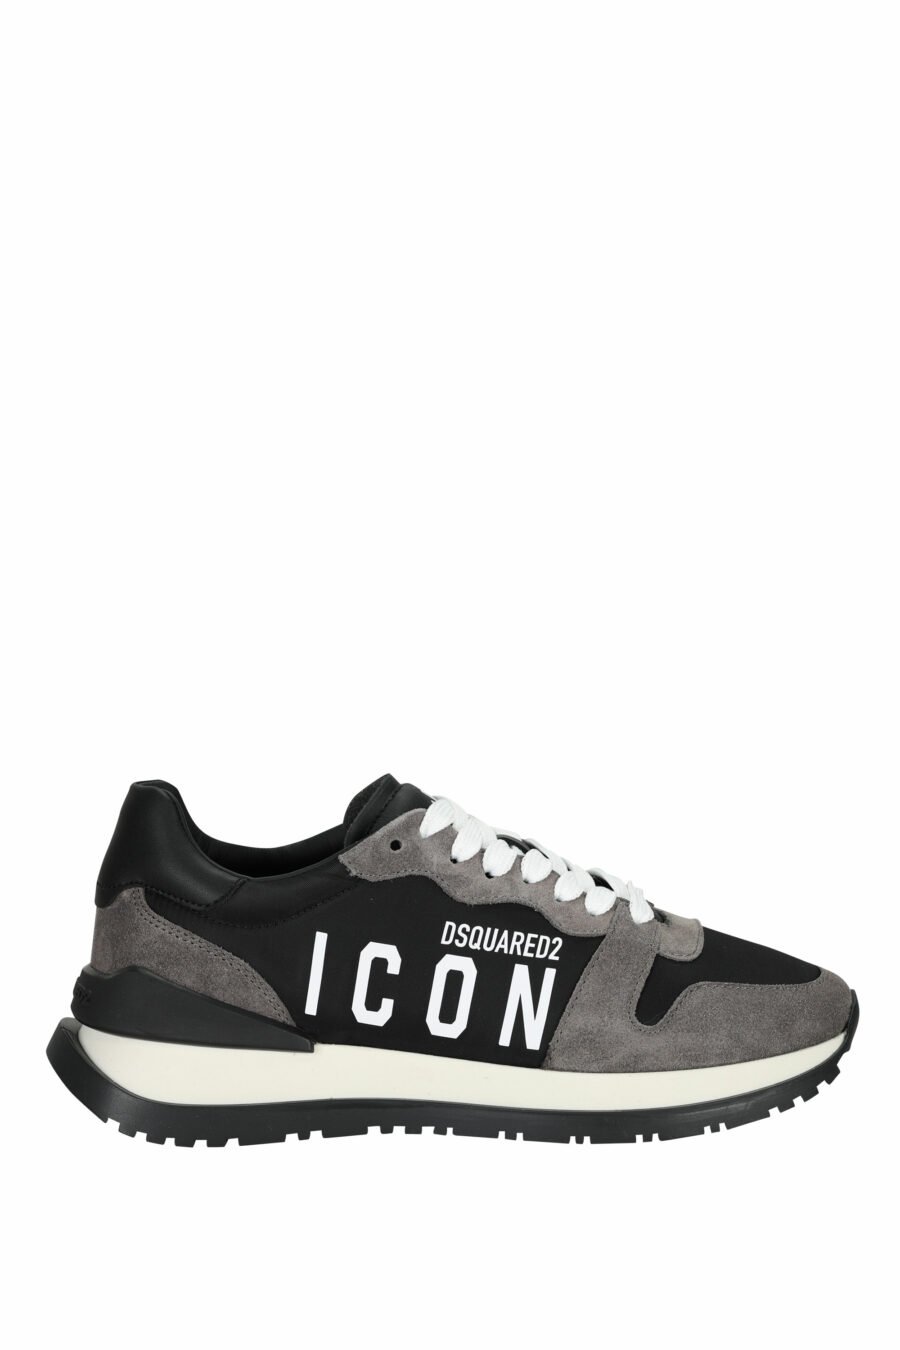 Black trainers with brown mix and mini logo "icon" - 8055777303825